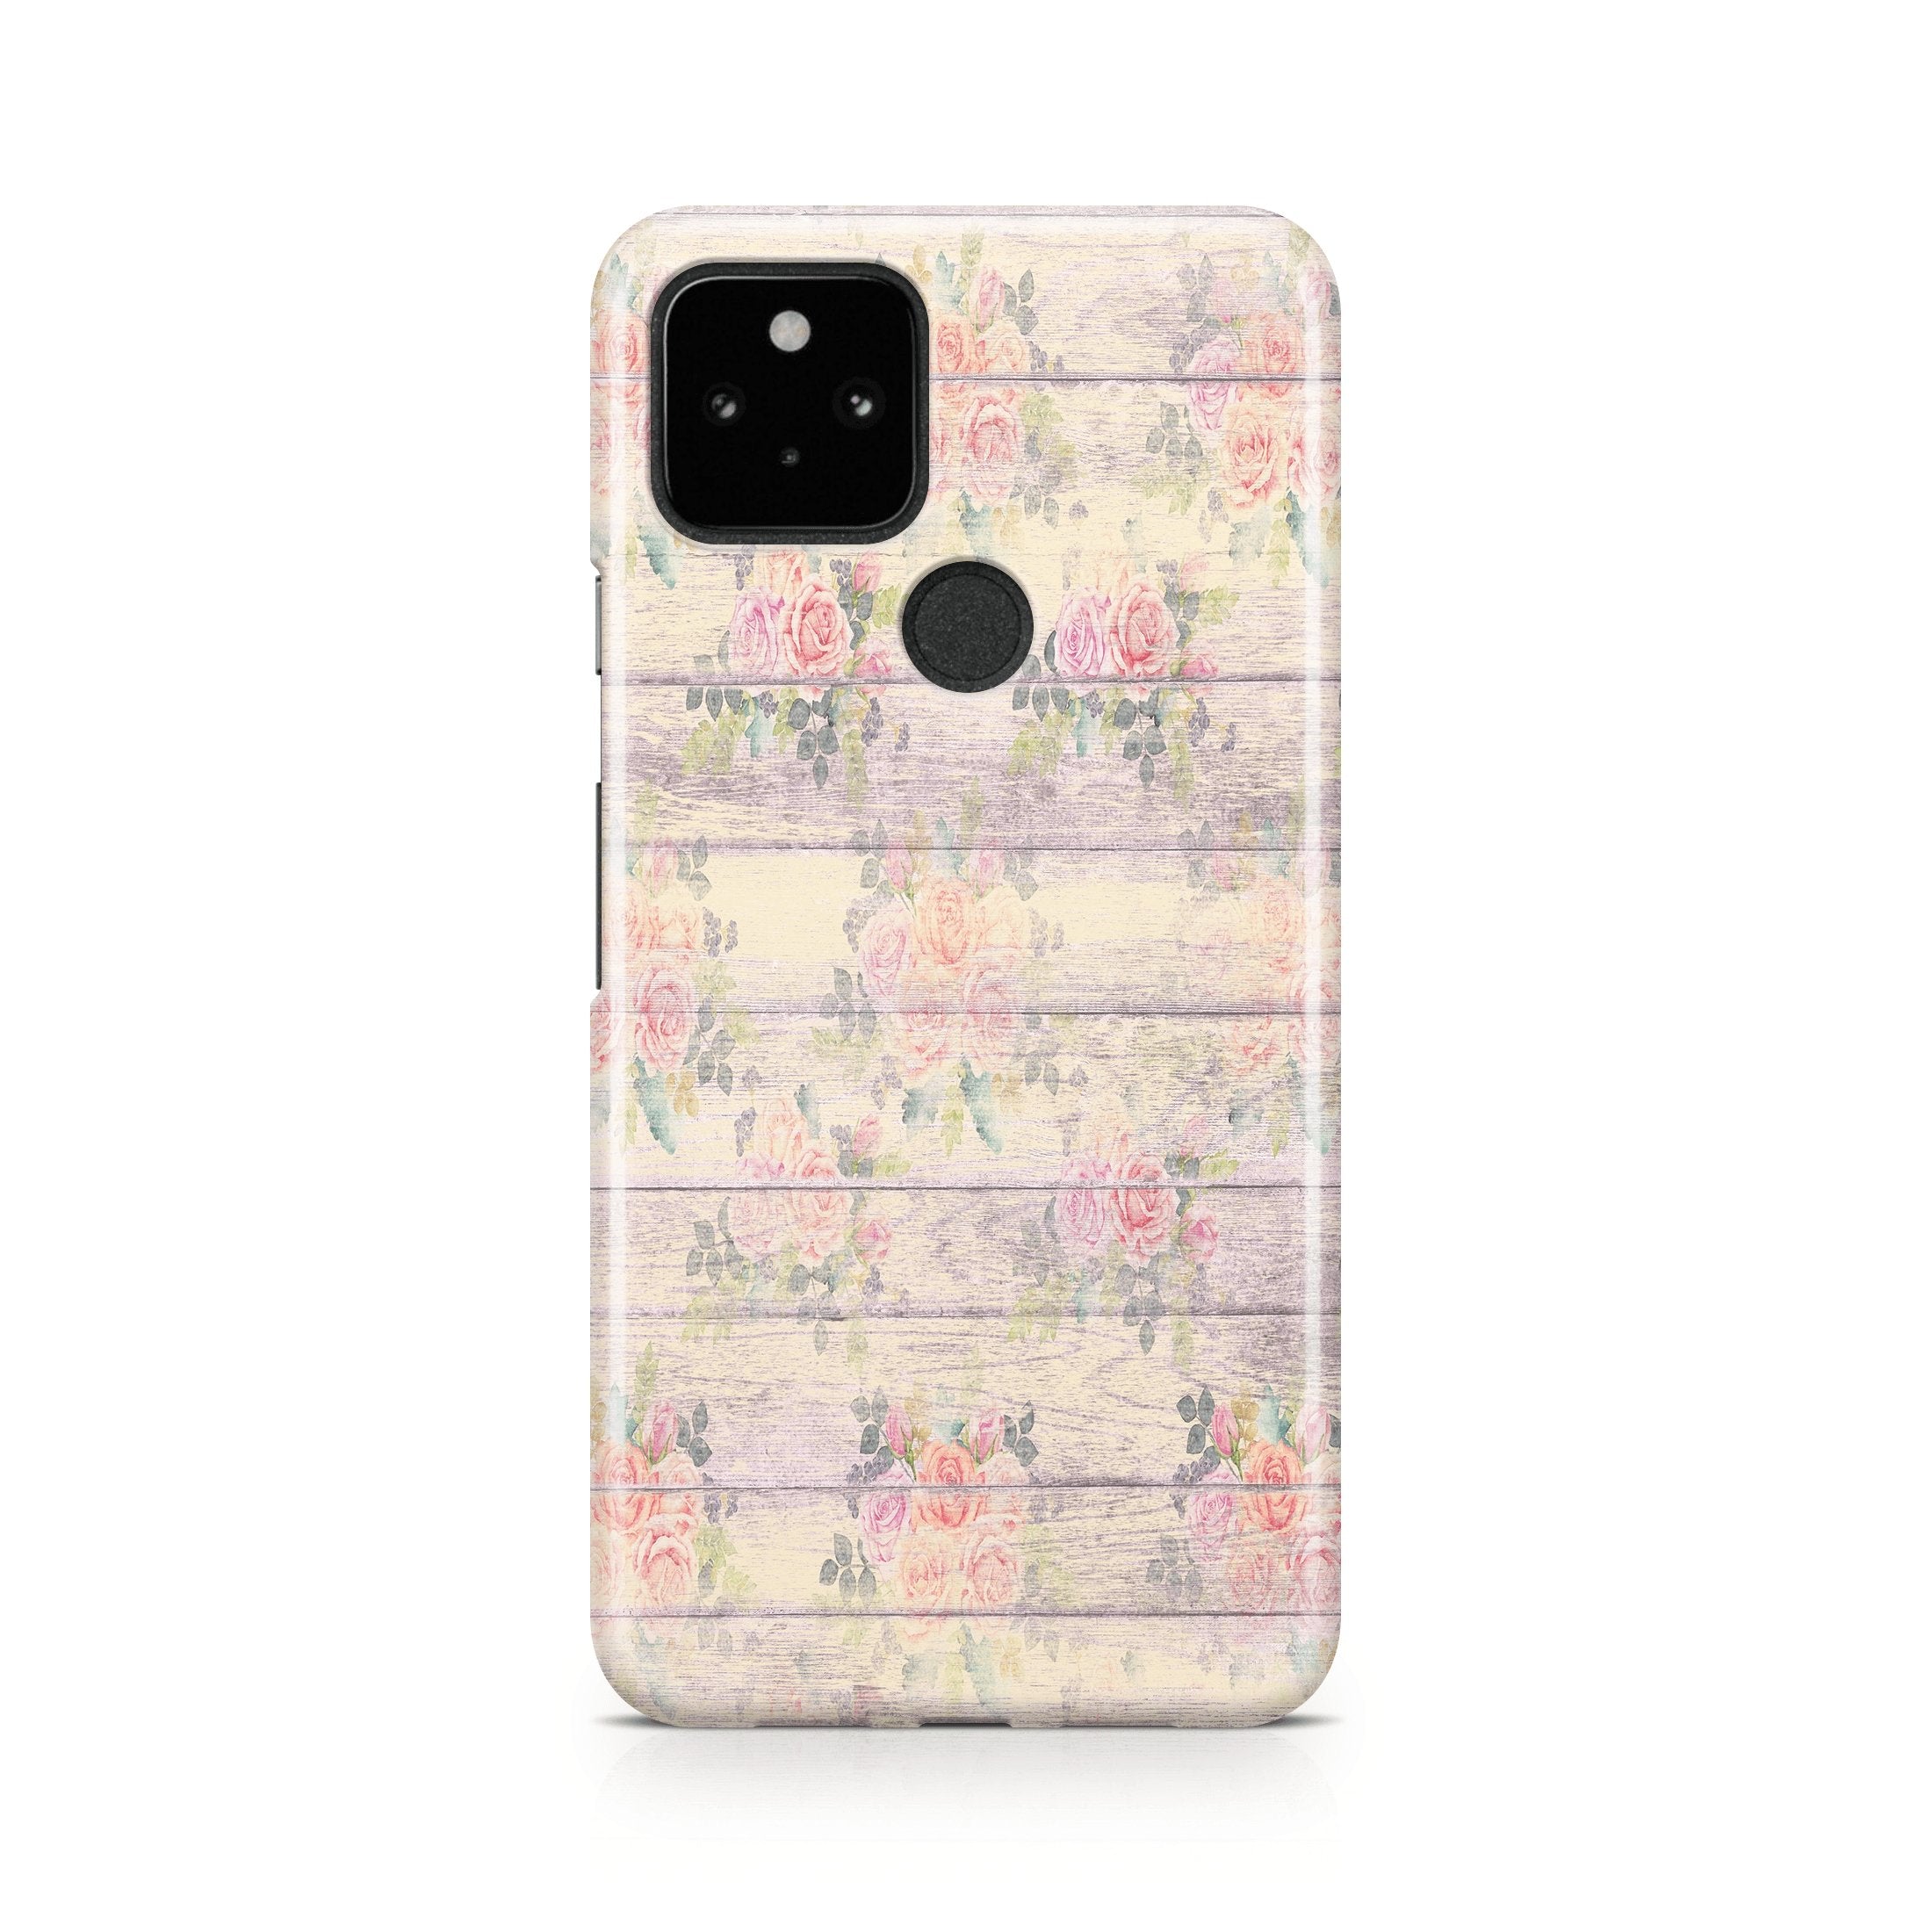 Shabby Chic Rosewood - Google phone case designs by CaseSwagger